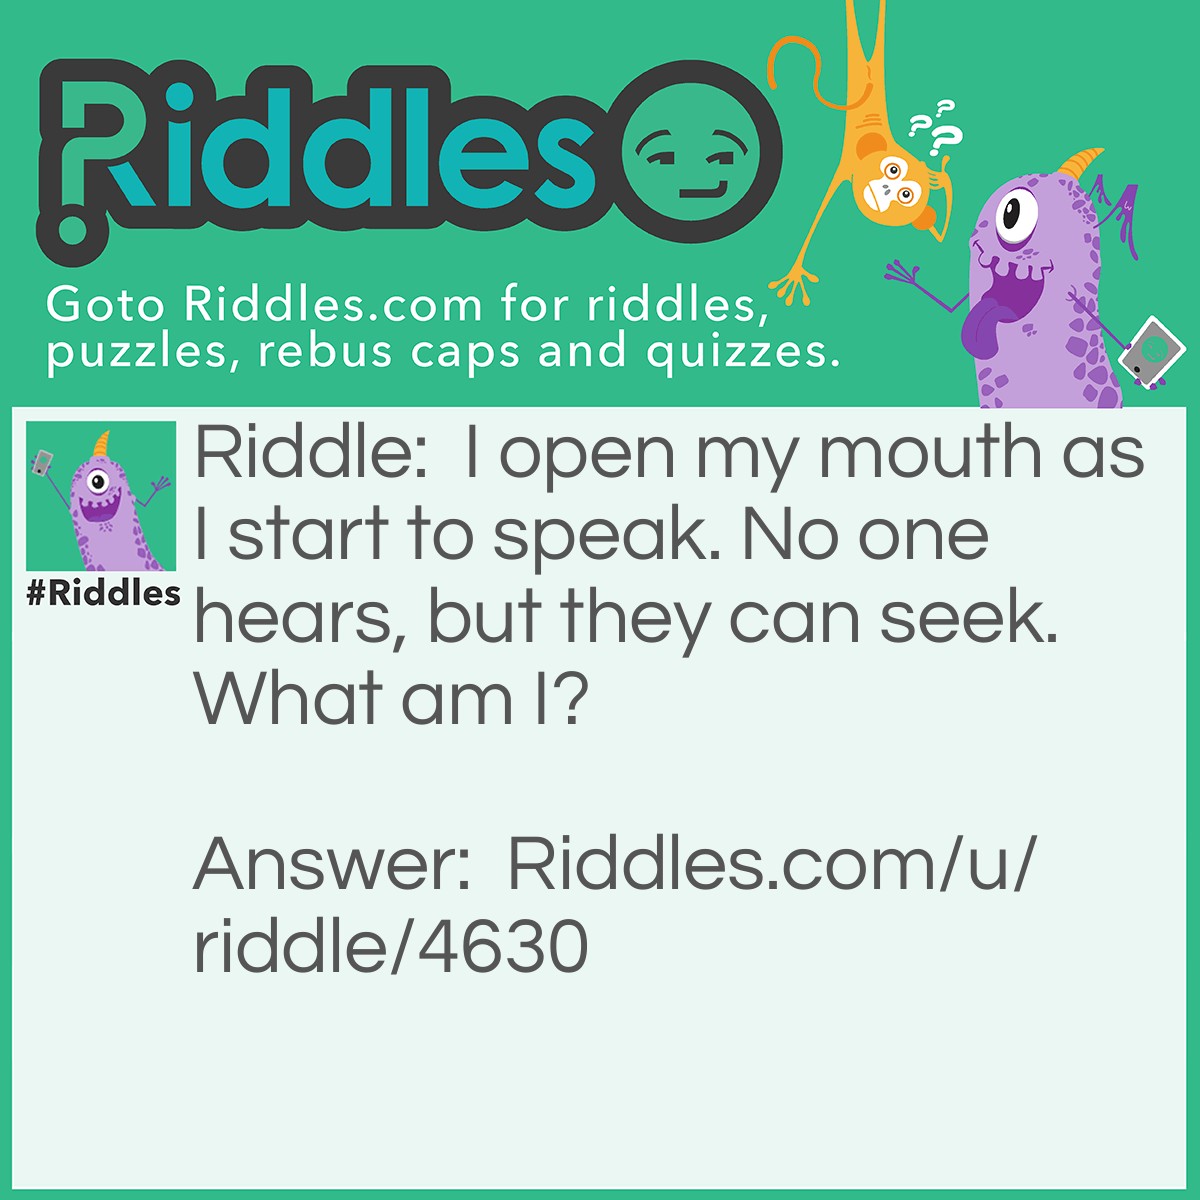 Riddle: I open my mouth as I start to speak. No one hears, but they can seek. What am I? Answer: Deaf.